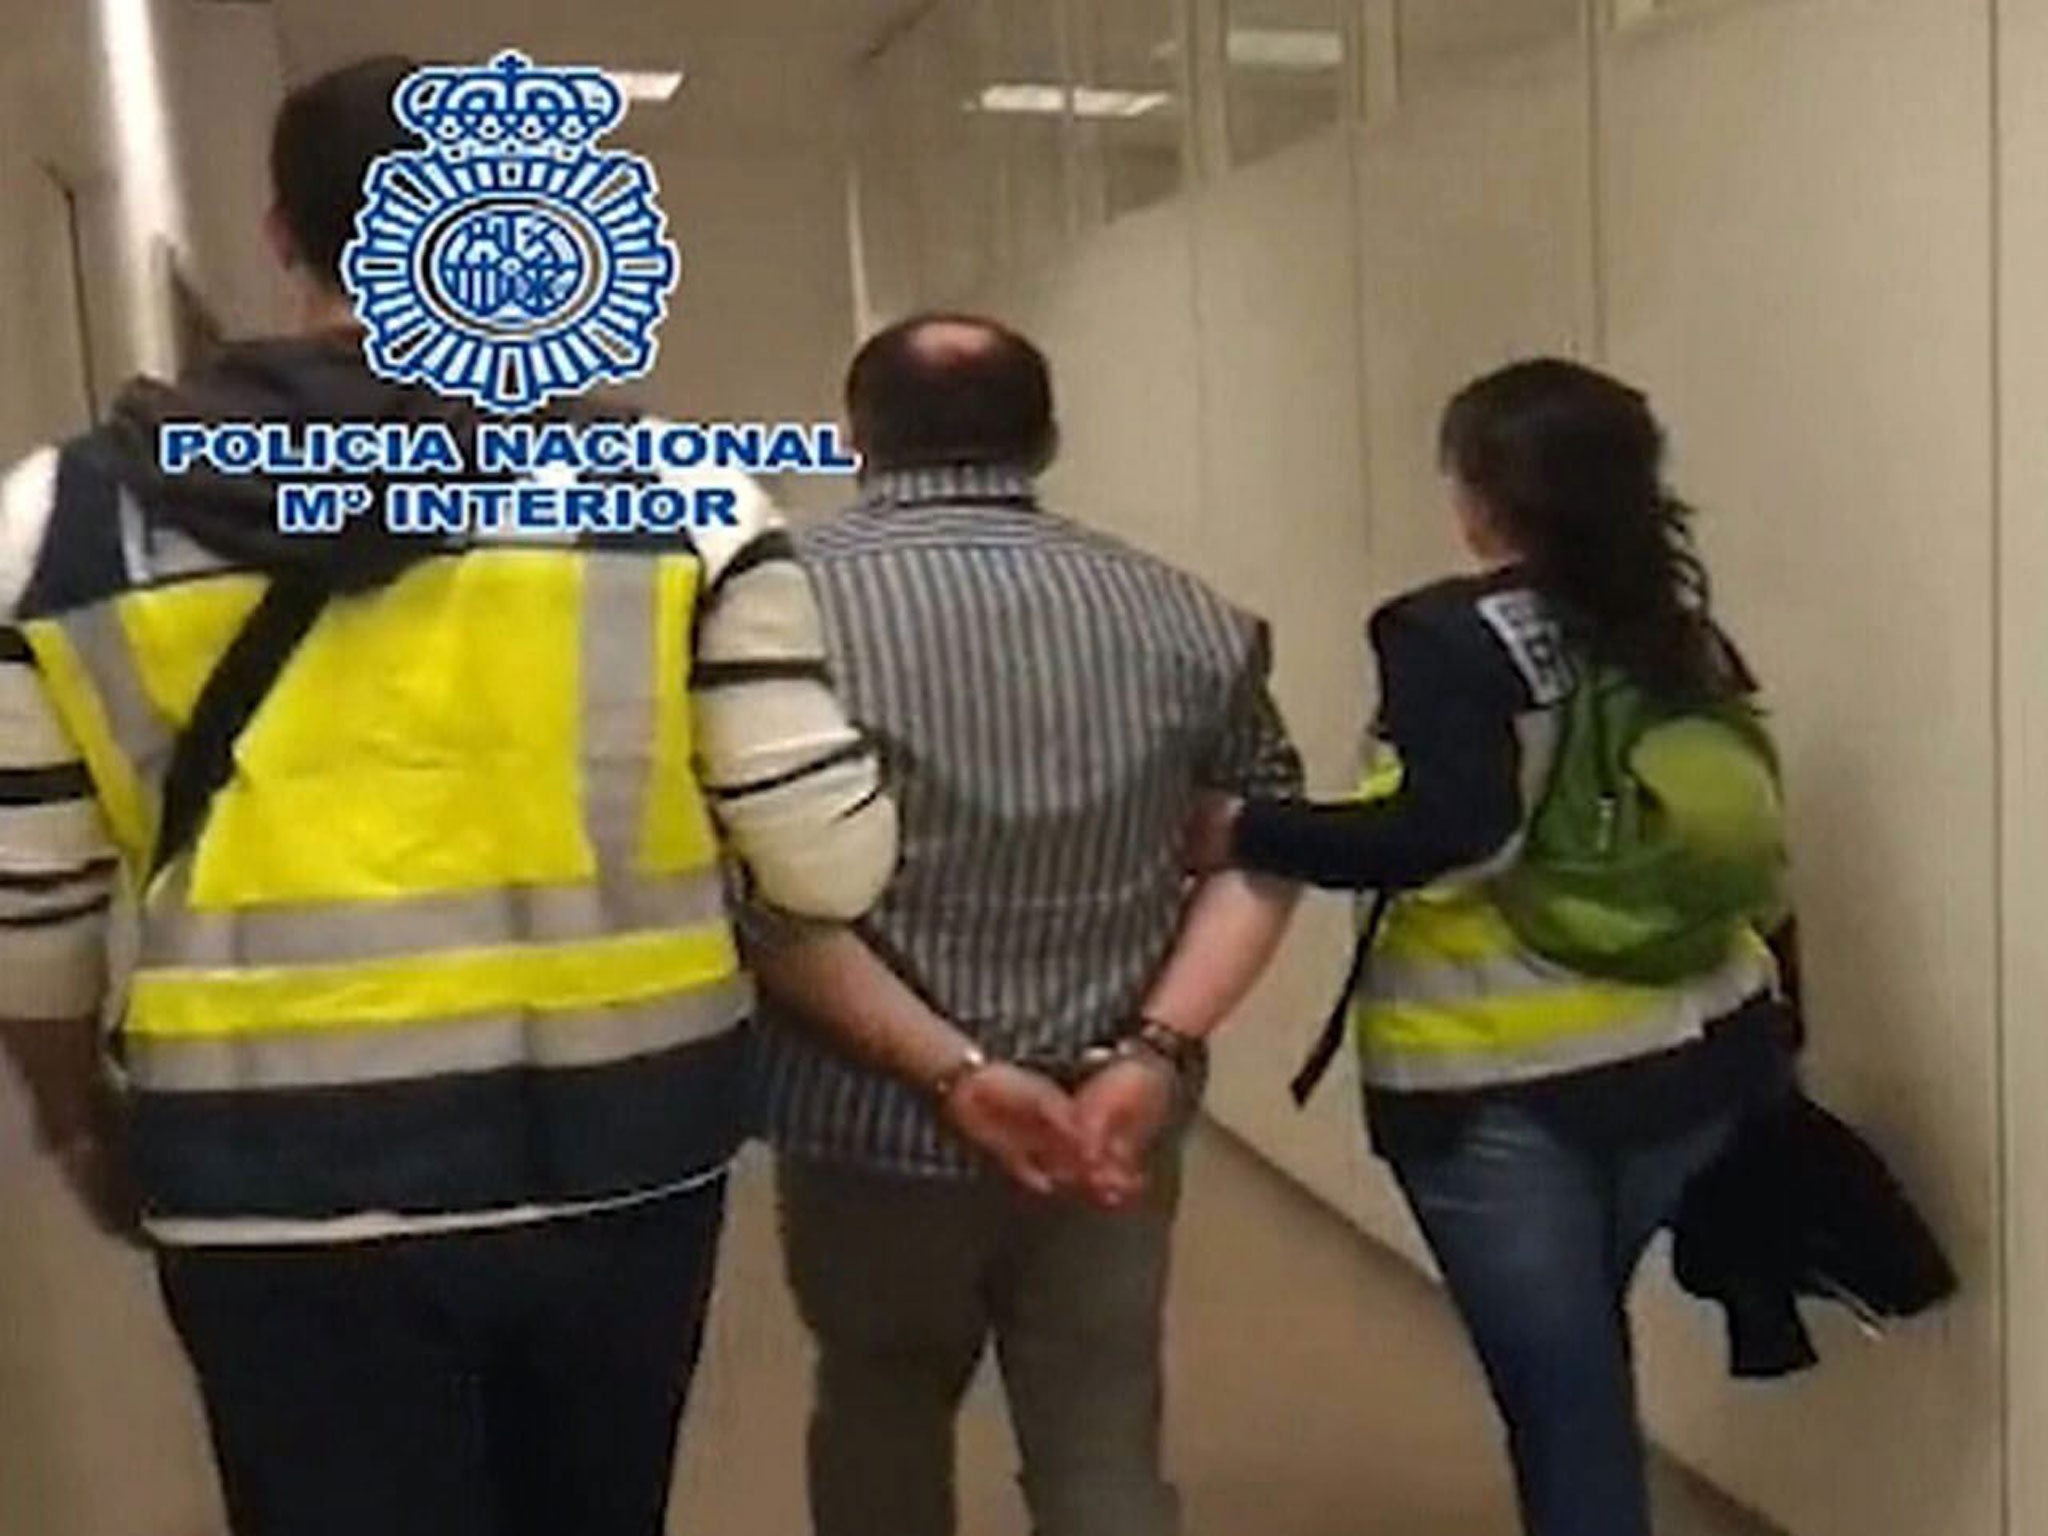 Spanish police officers detaining the Liberty Reserve founder Arthur Budovsky in Barajas airport, Madrid